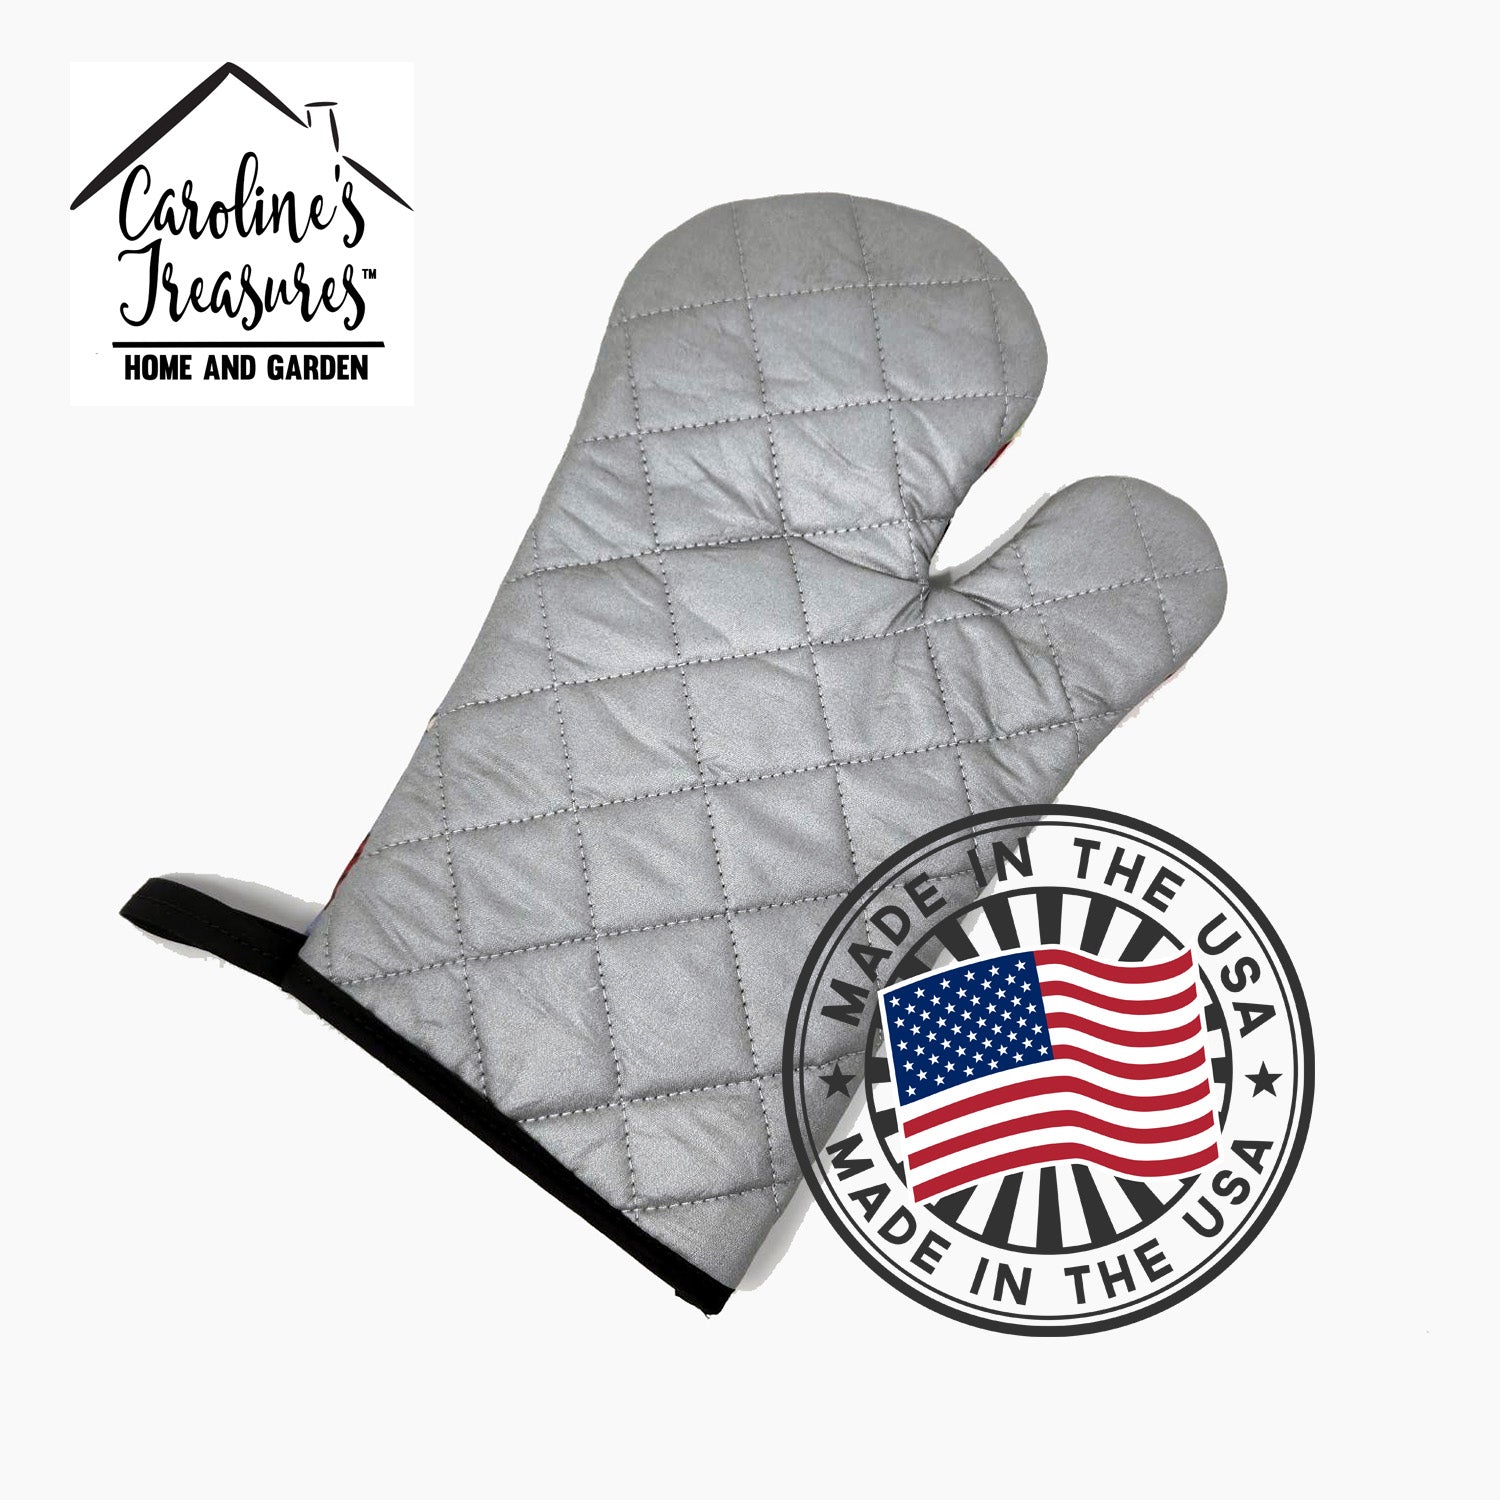 Dog House Collection Brindle Chihuahua Oven Mitt BB4070OVMT  the-store.com.